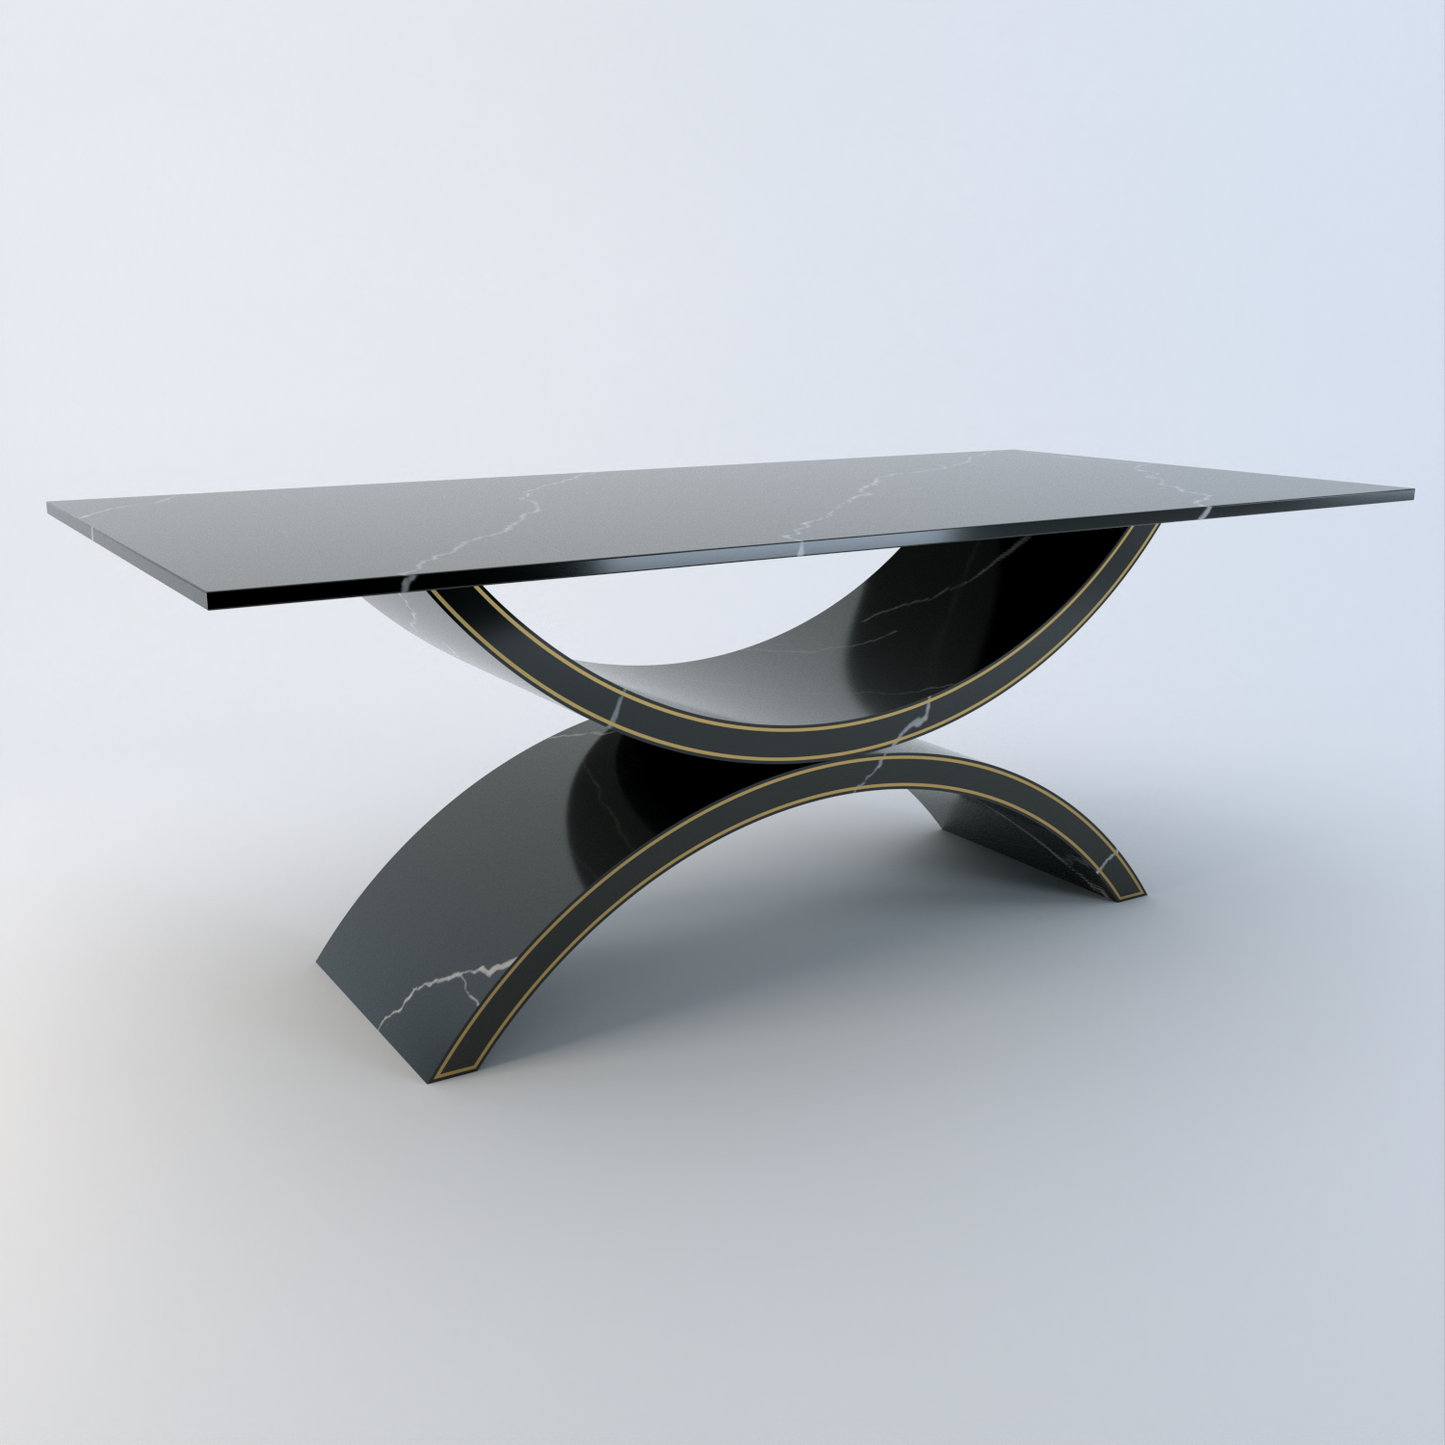 MODENA DINING TABLE